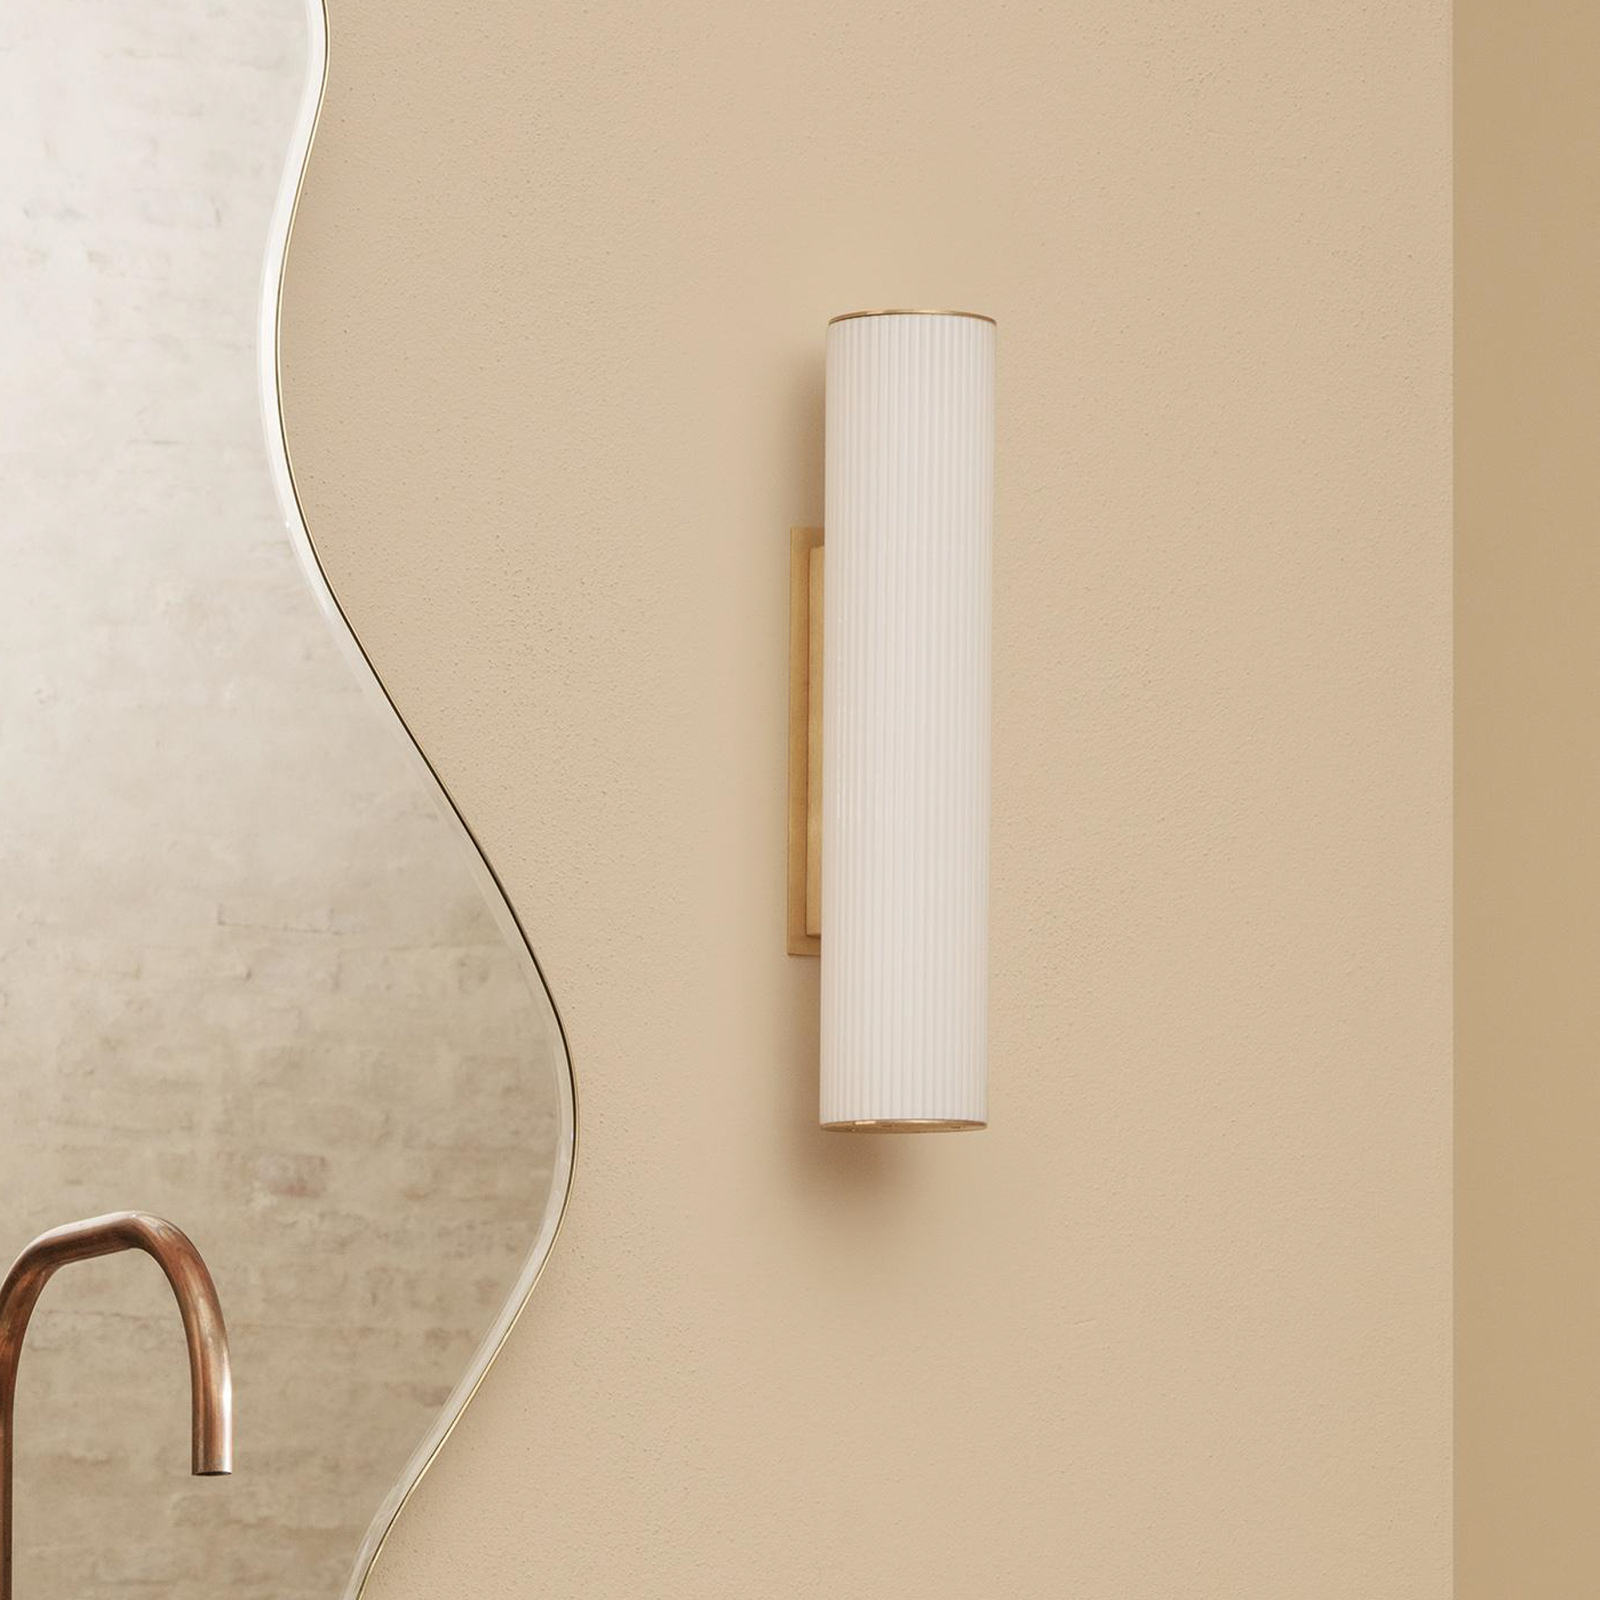 ferm LIVING Vuelta 40, white/brass, plug, remote control, dimmable.